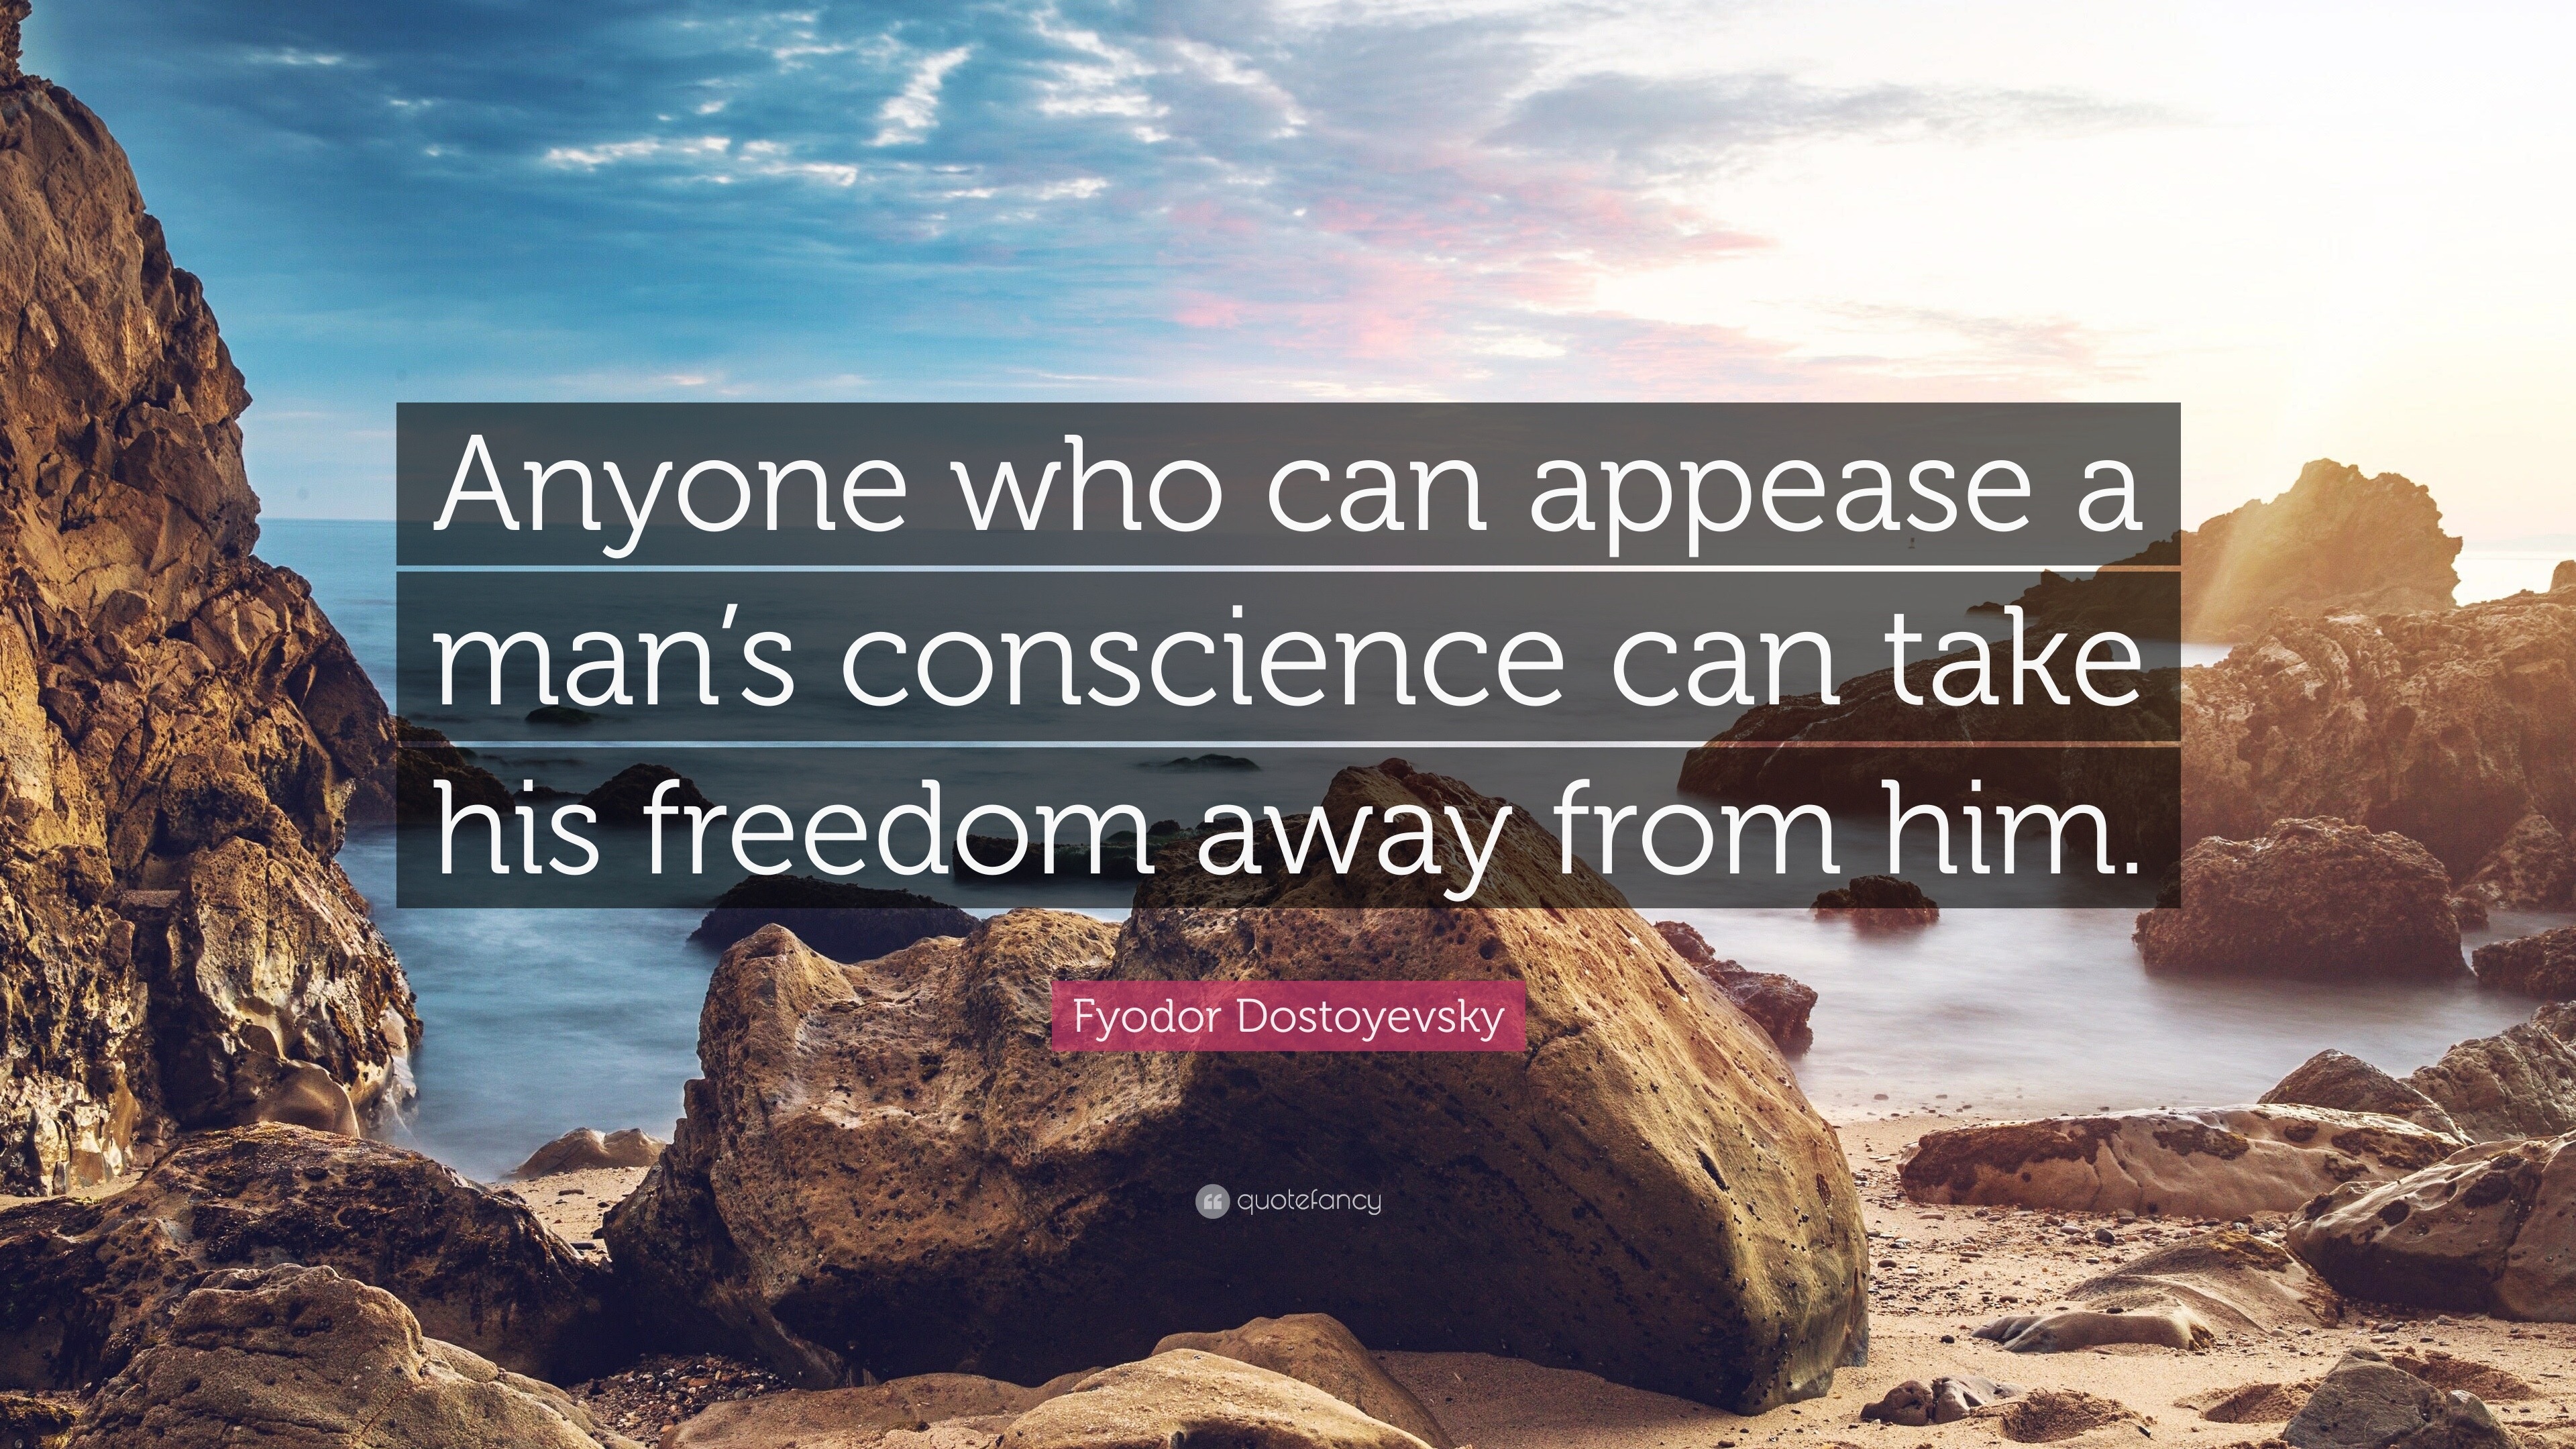 Fyodor Dostoyevsky Quote: “Anyone who can appease a man’s conscience ...